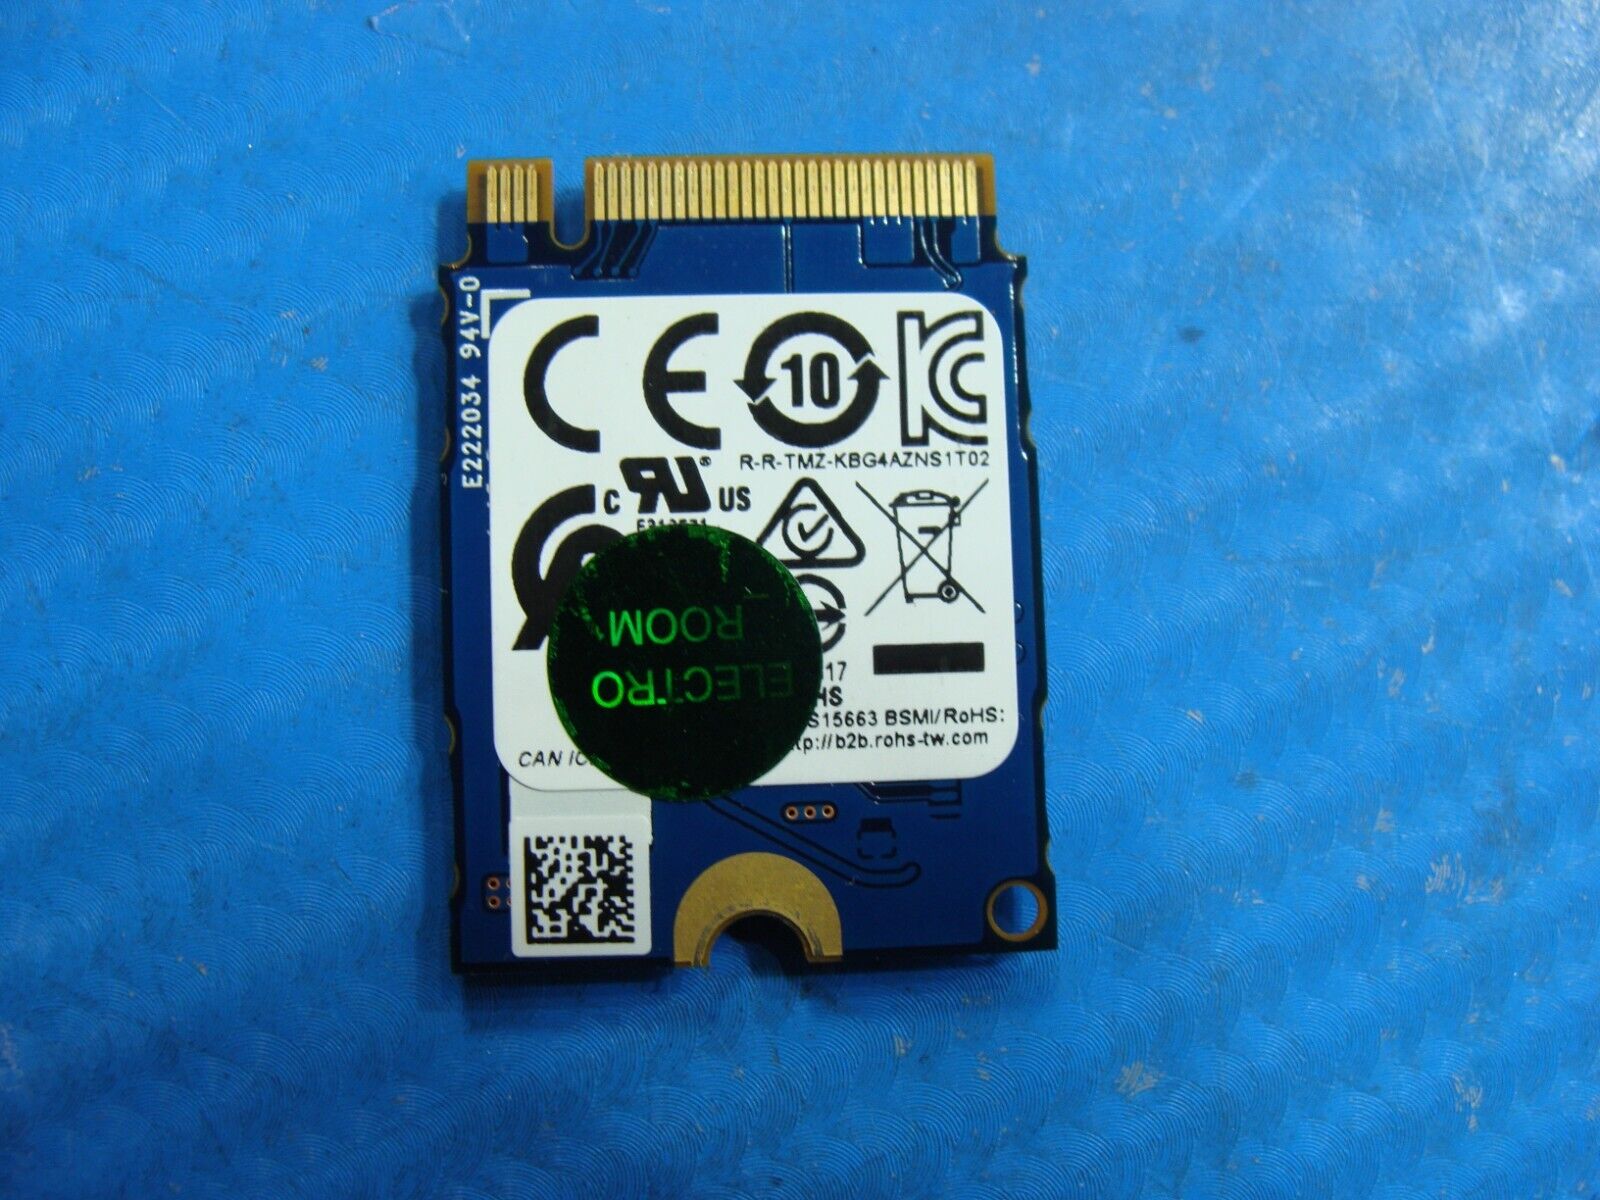 Dell 3410 Kioxia 256GB NVMe M.2 SSD Solid State Drive KBG40ZNS256G FWJTG